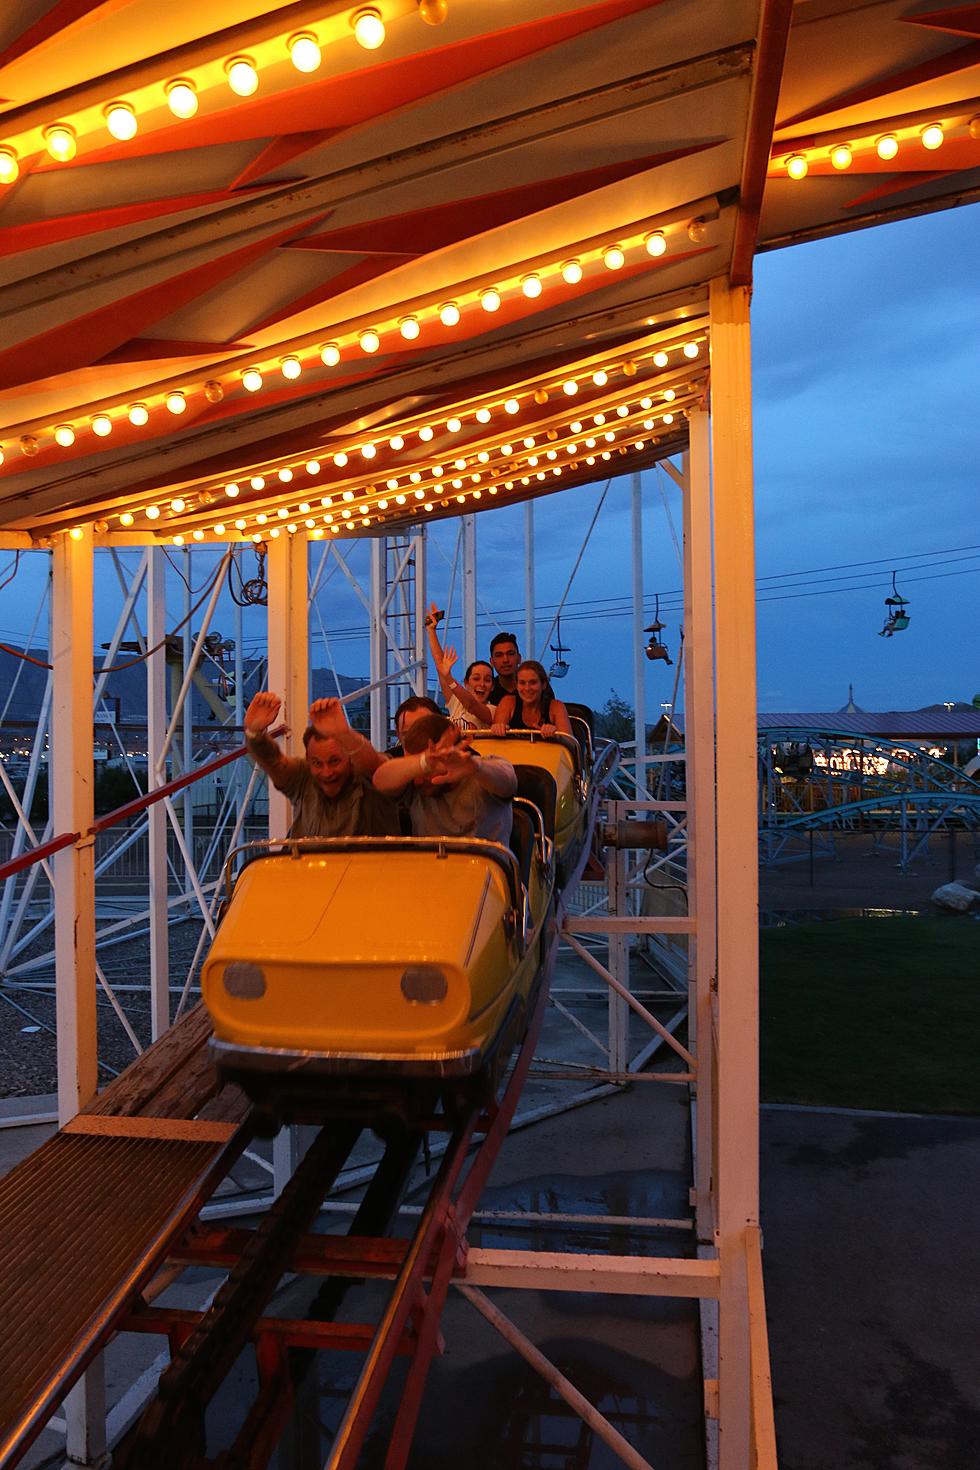 Western Playland Has A New Ride For 2019